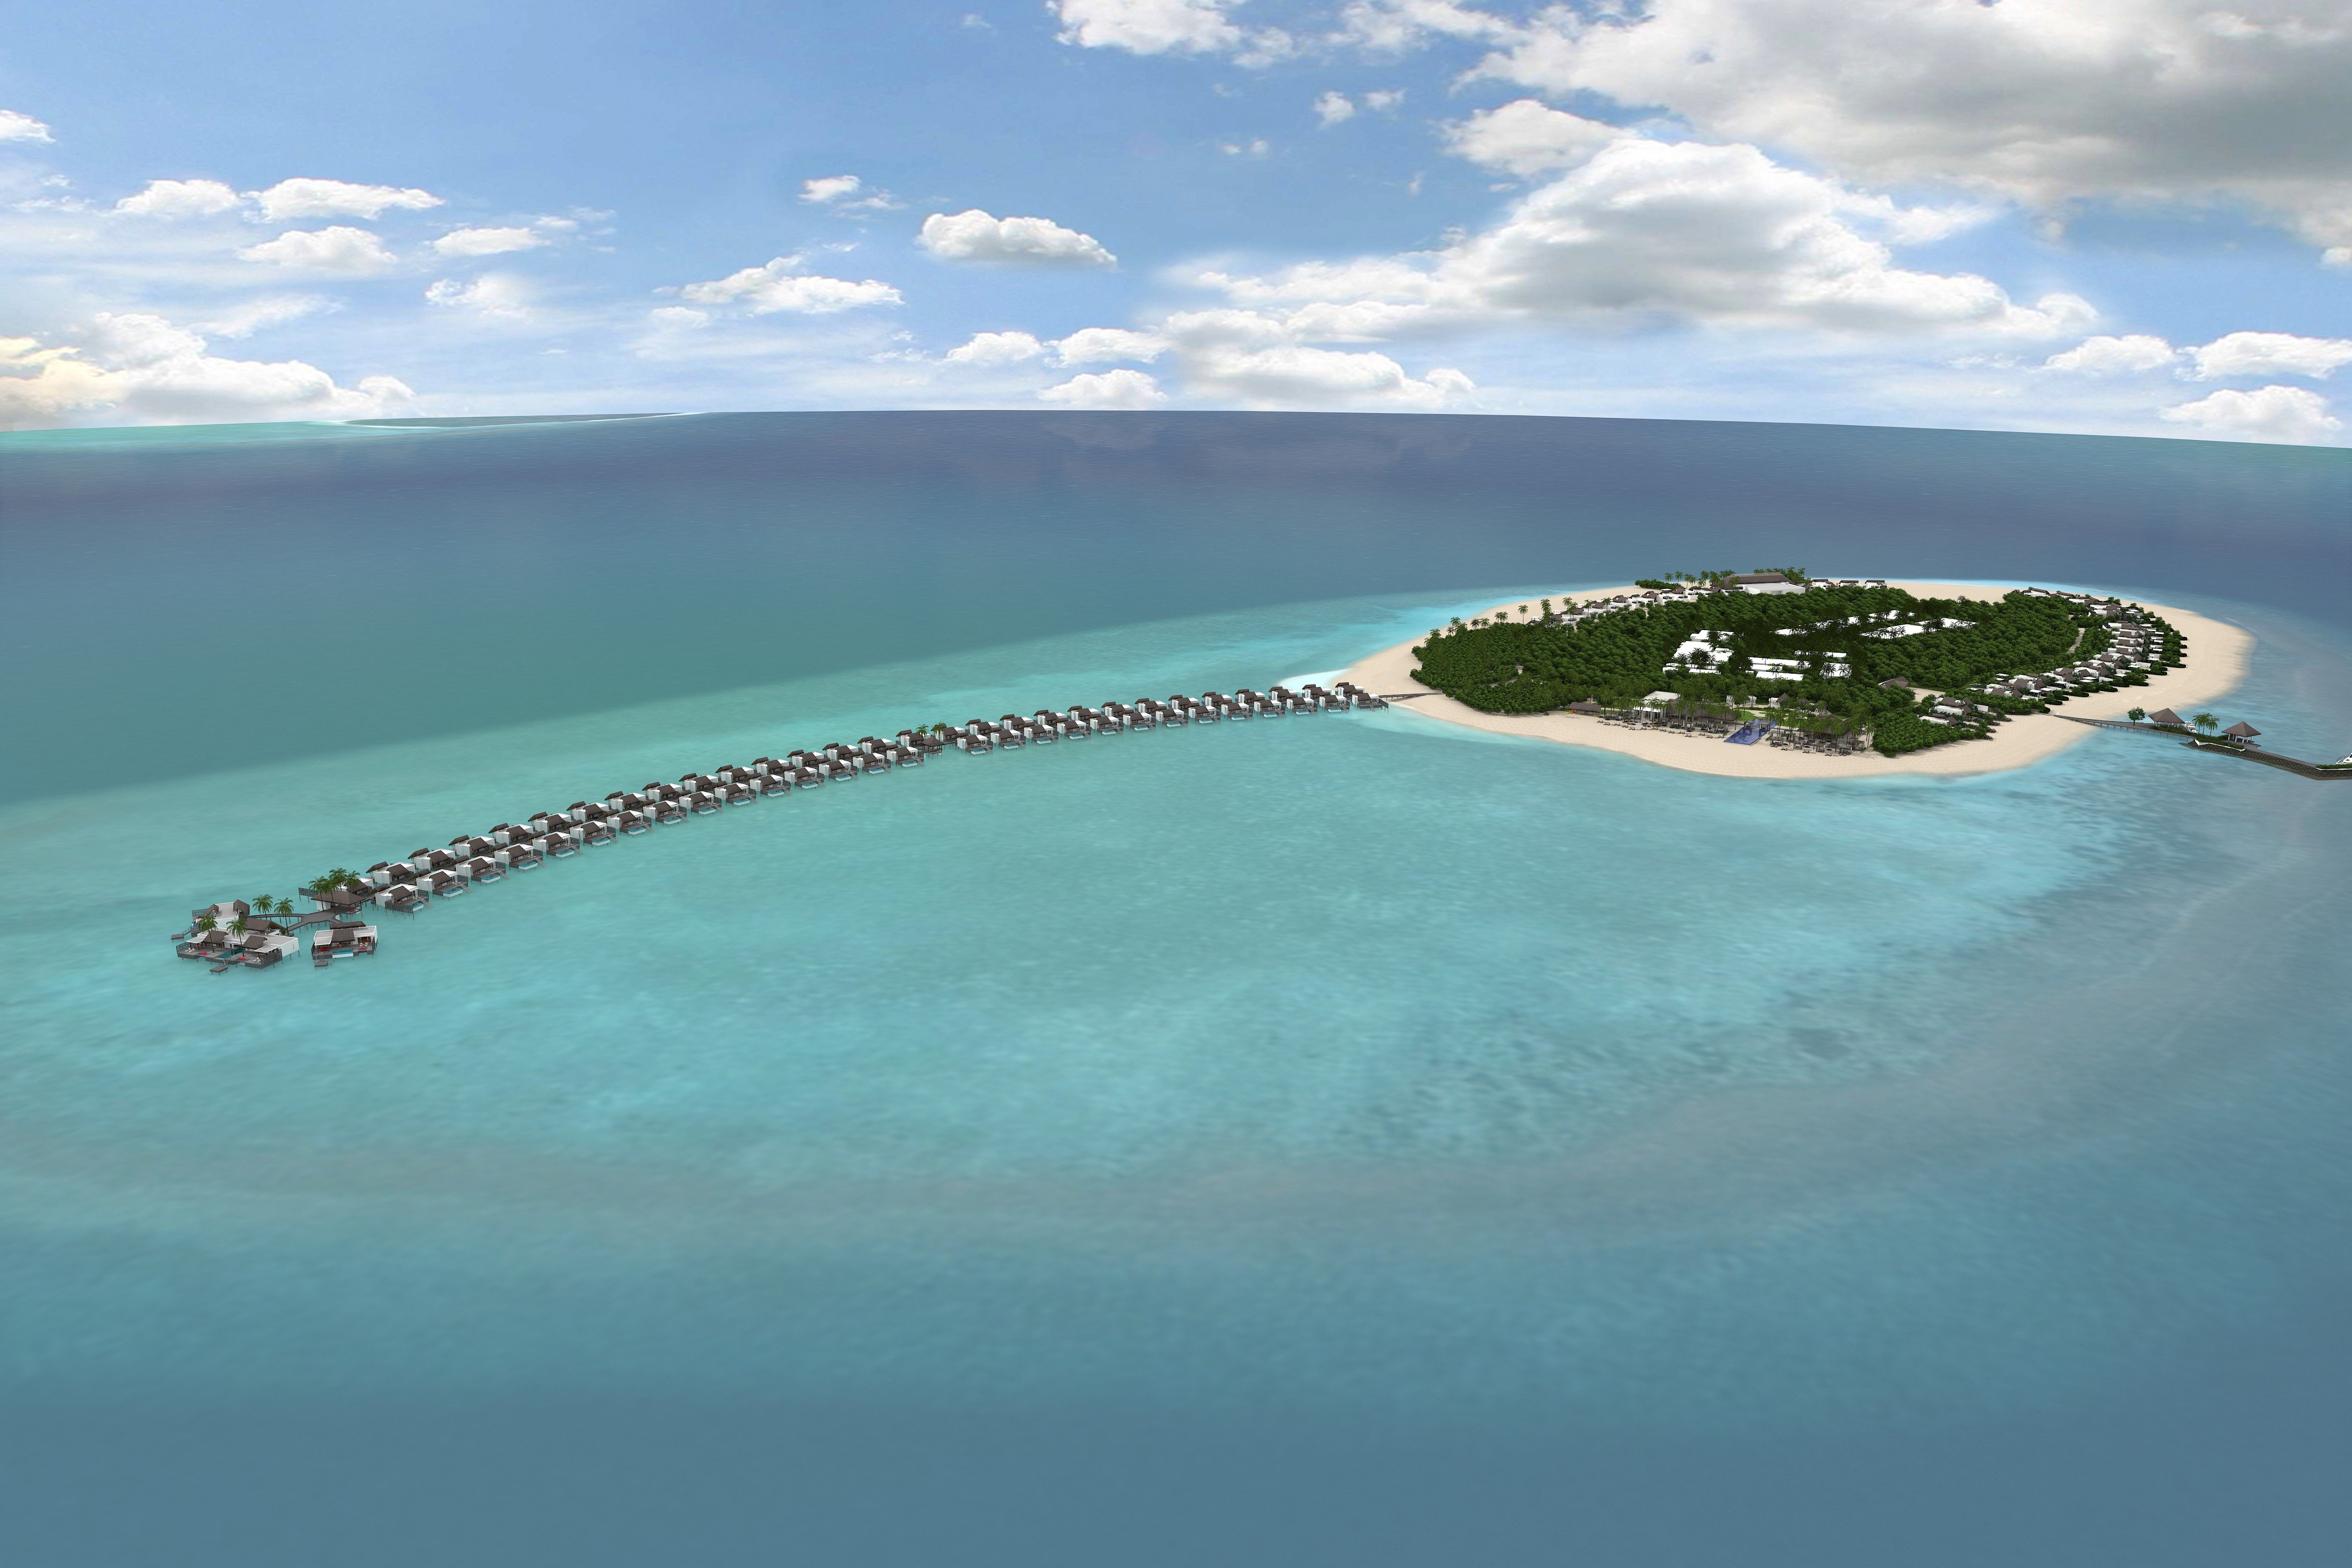 Emerald Maldives Resort and Spa, featuring 120 luxury villas on the island of Fasmendhoo, which forms part of Raa Atoll in the Maldives, is expected to open in August.